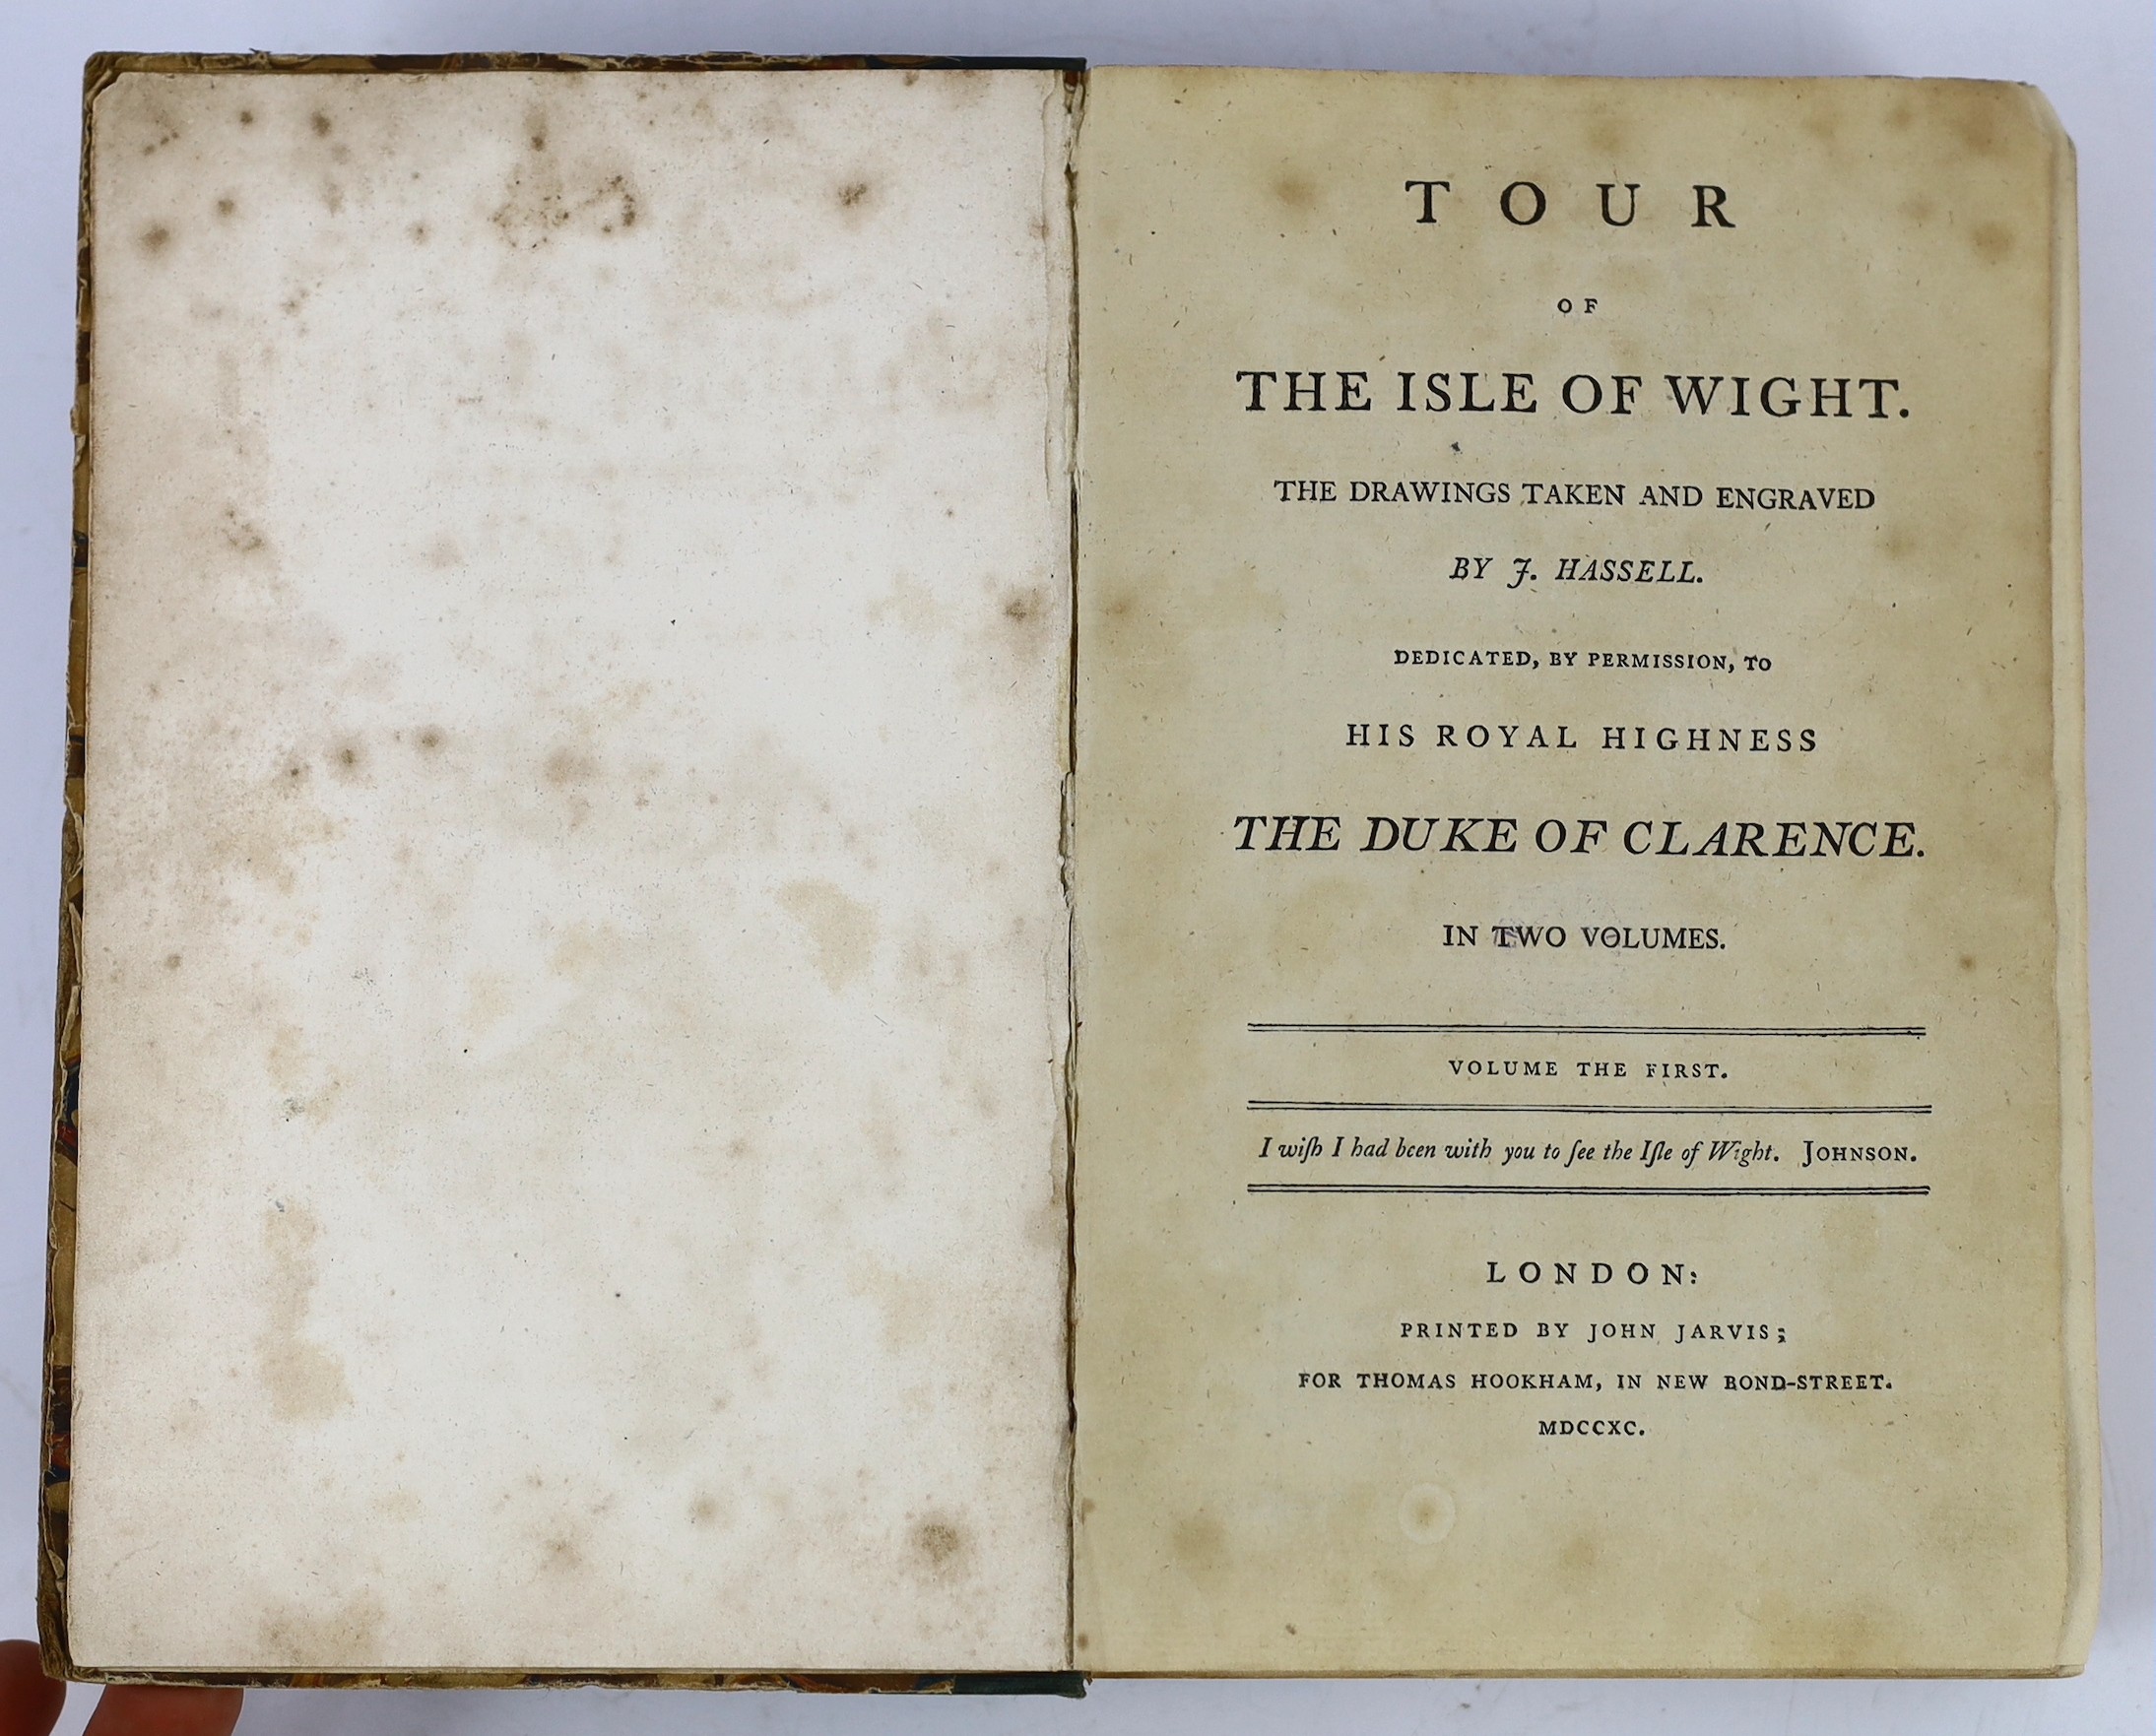 ISLE OF WIGHT: (Hookham, T.) Tour of the Isle of Wight. The drawings taken and engraved by J. Hassell ... 2 vols. (bound as one). pictorial engraved and printed titles and 30 tinted aquatint plates, subscribers list; lat